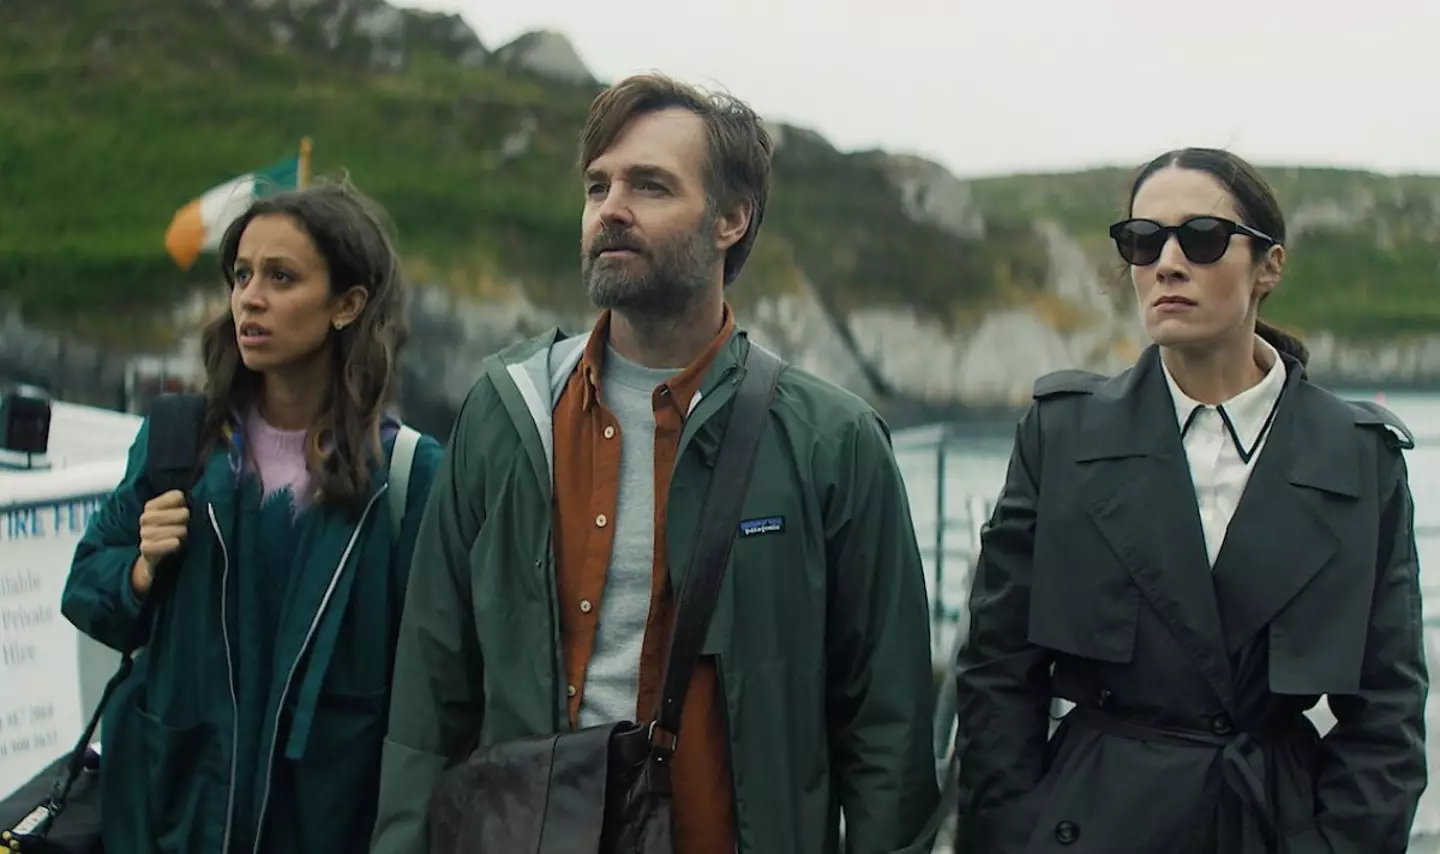 Bodkin is led by former SNL star Will Forte. (Netflix)